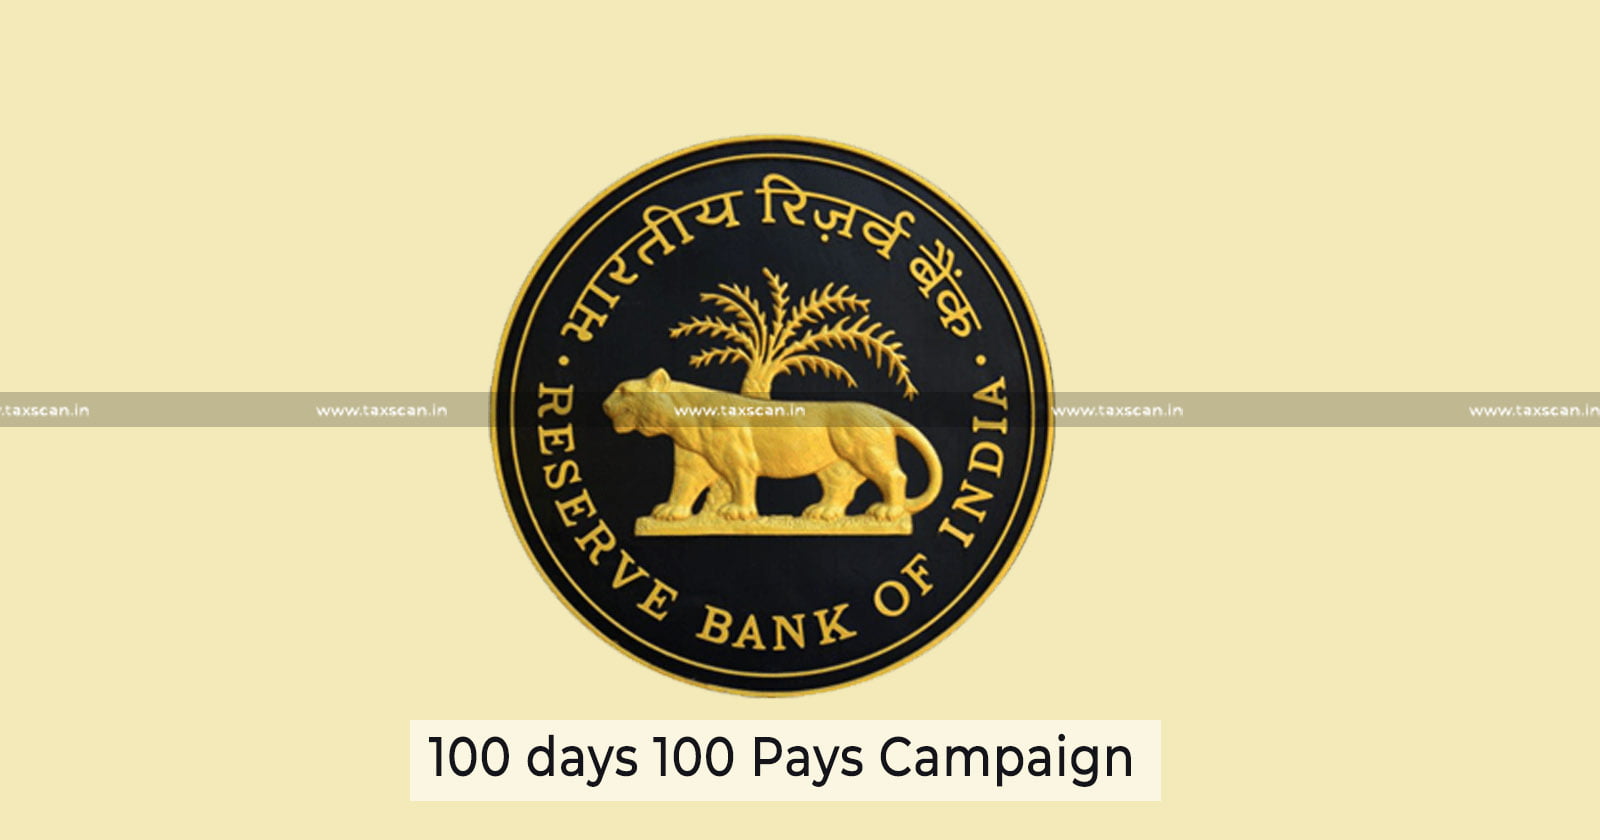 RBI launches - 100 days 100 paysCampaign for Return of Unclaimed Deposits - TAXSCAN